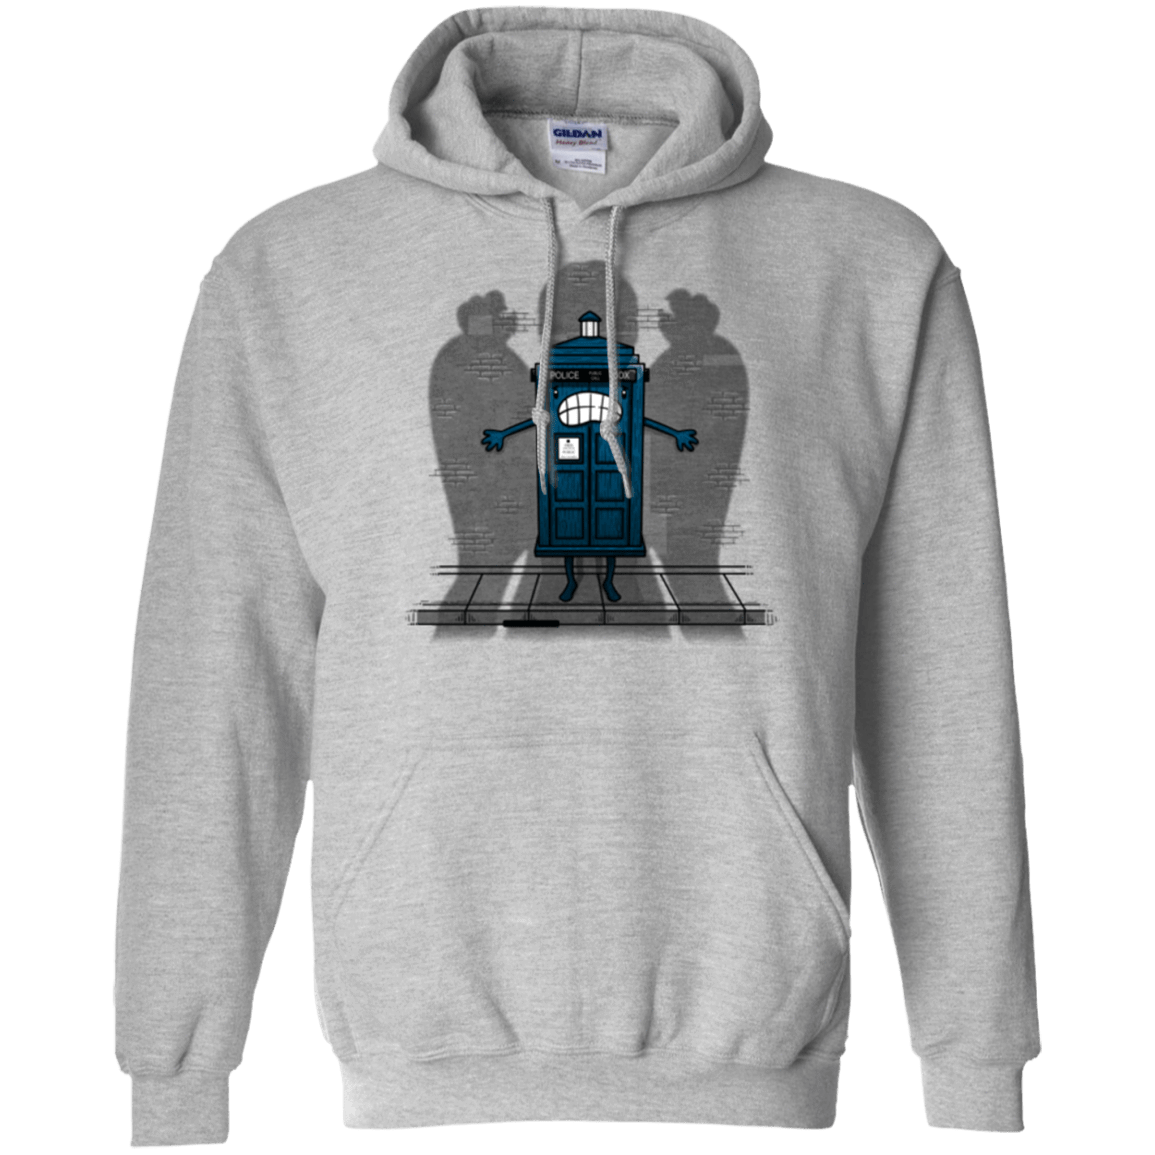 Sweatshirts Sport Grey / Small Angels Are Here Pullover Hoodie